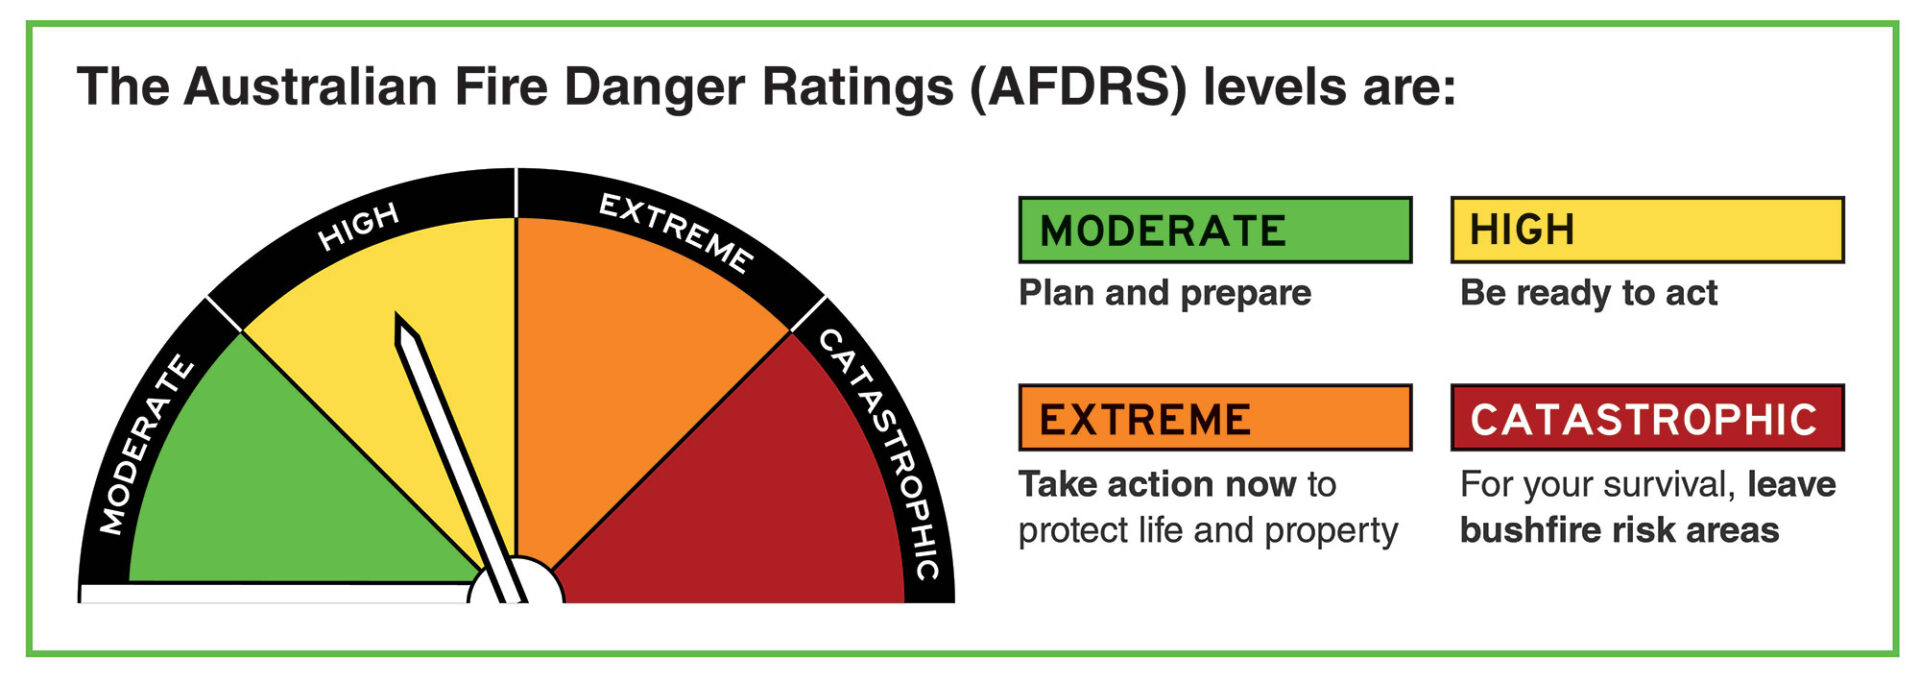 Image displaying the new Australian Fire Danger Ratings 